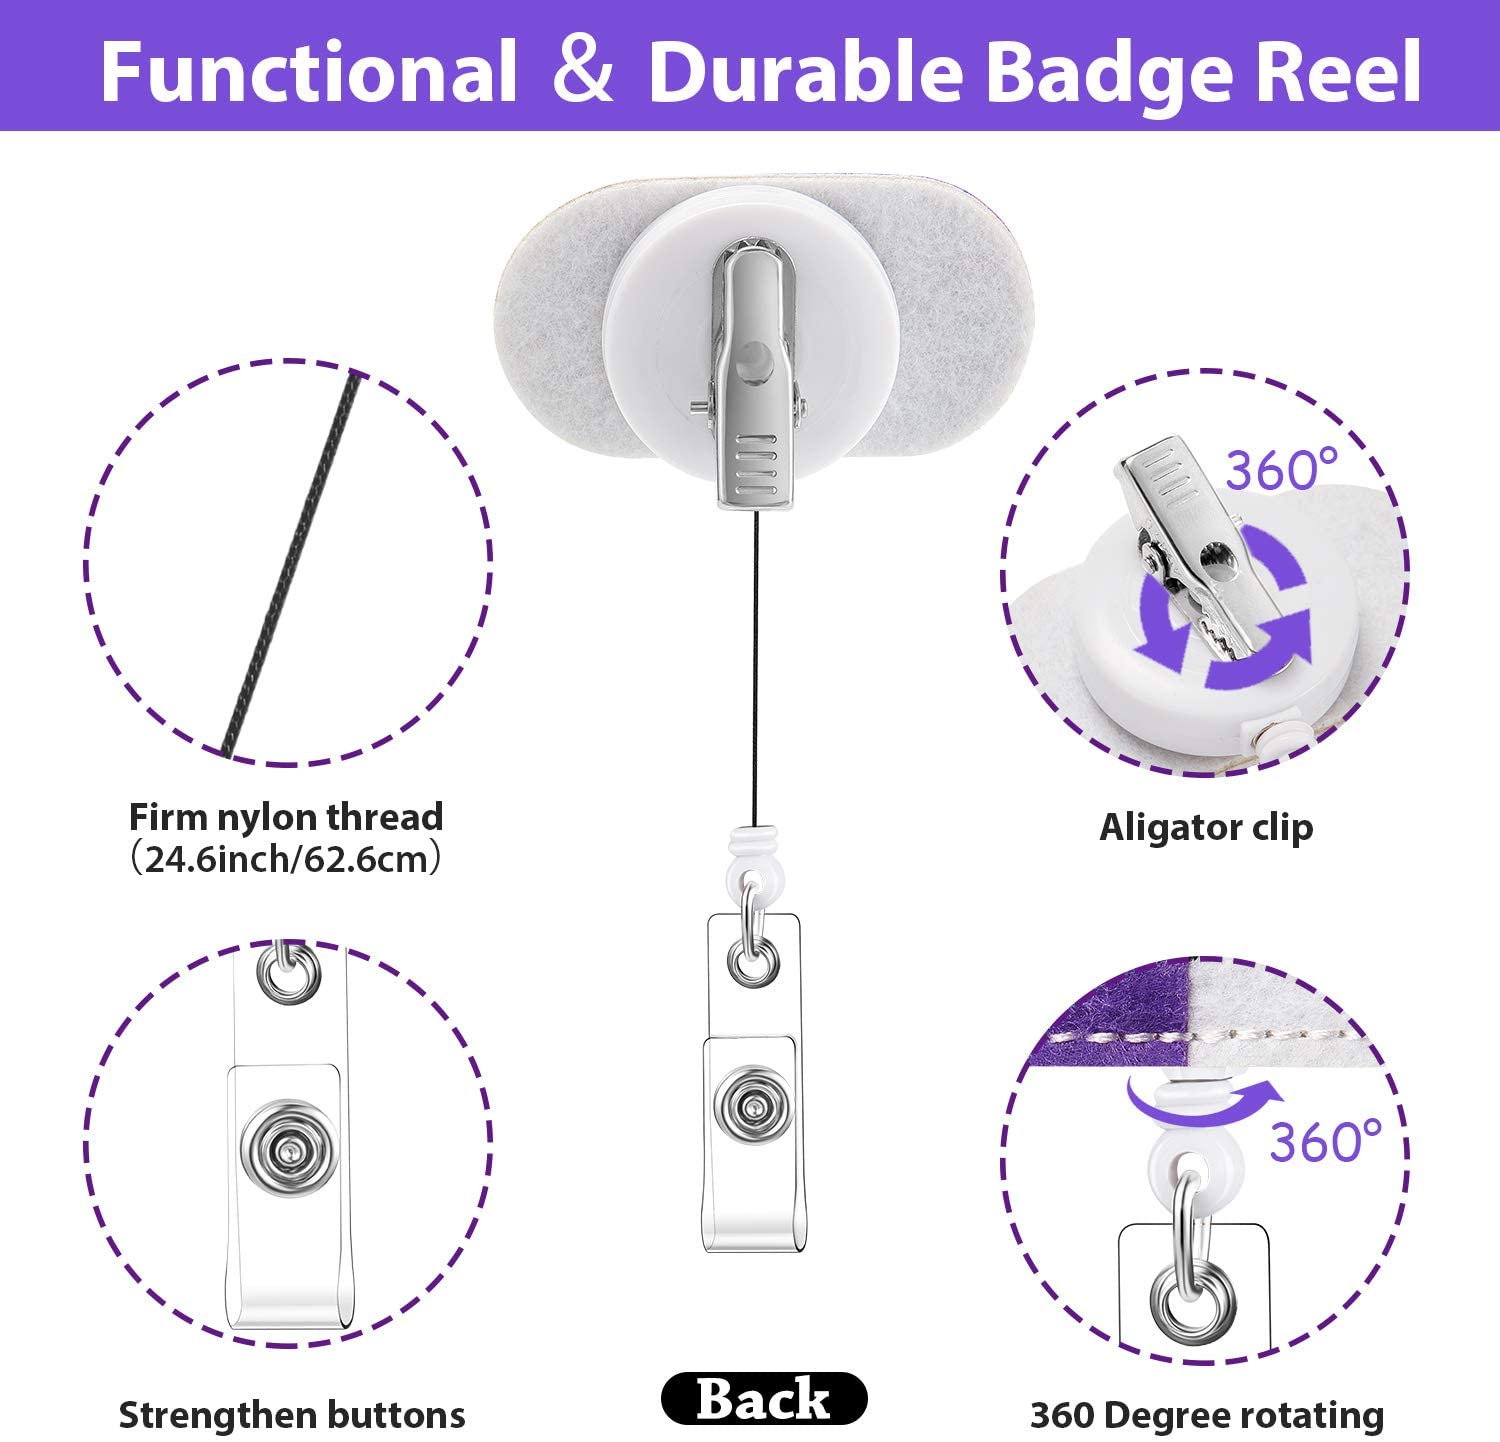 3 Pieces Pill Nurse Badge Reel Retractable ID Name Badge Holder with 360 Degree Swivel Alligator Clip for Nurse Students Doctors